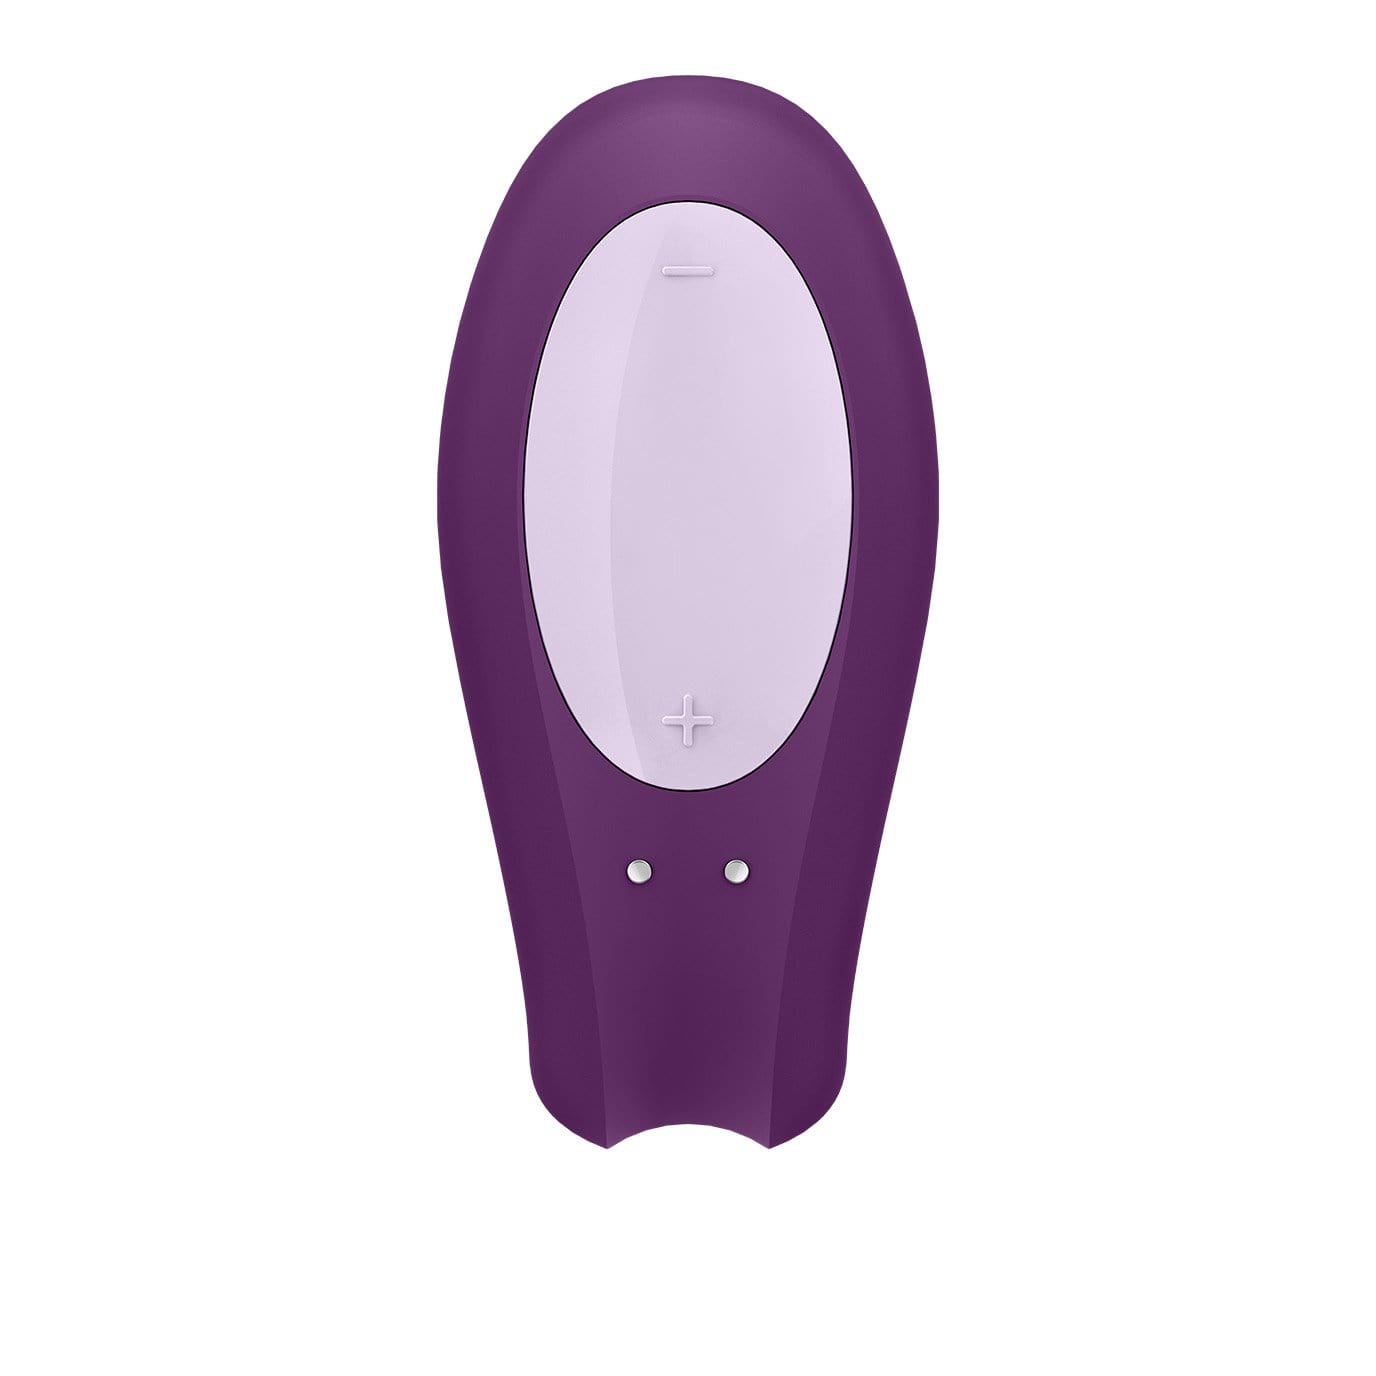 Satisfyer - Double Joy App-Controlled Partner Vibrator (Violet) FREE GIFT Couple's Massager (Vibration) Rechargeable 4061504002408 CherryAffairs